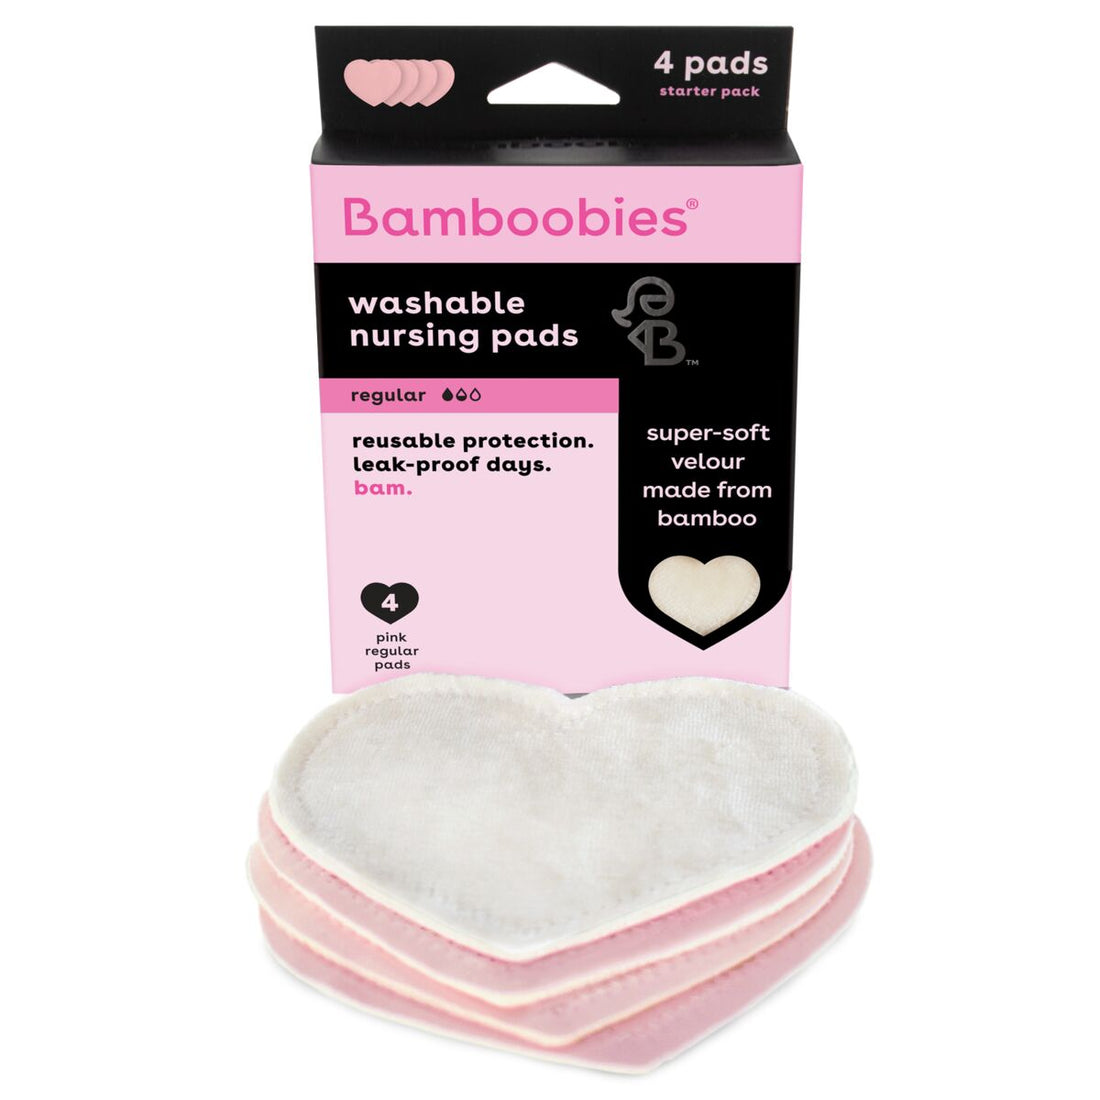 Baby Products Online - Disposable nursing pads for breastfeeding